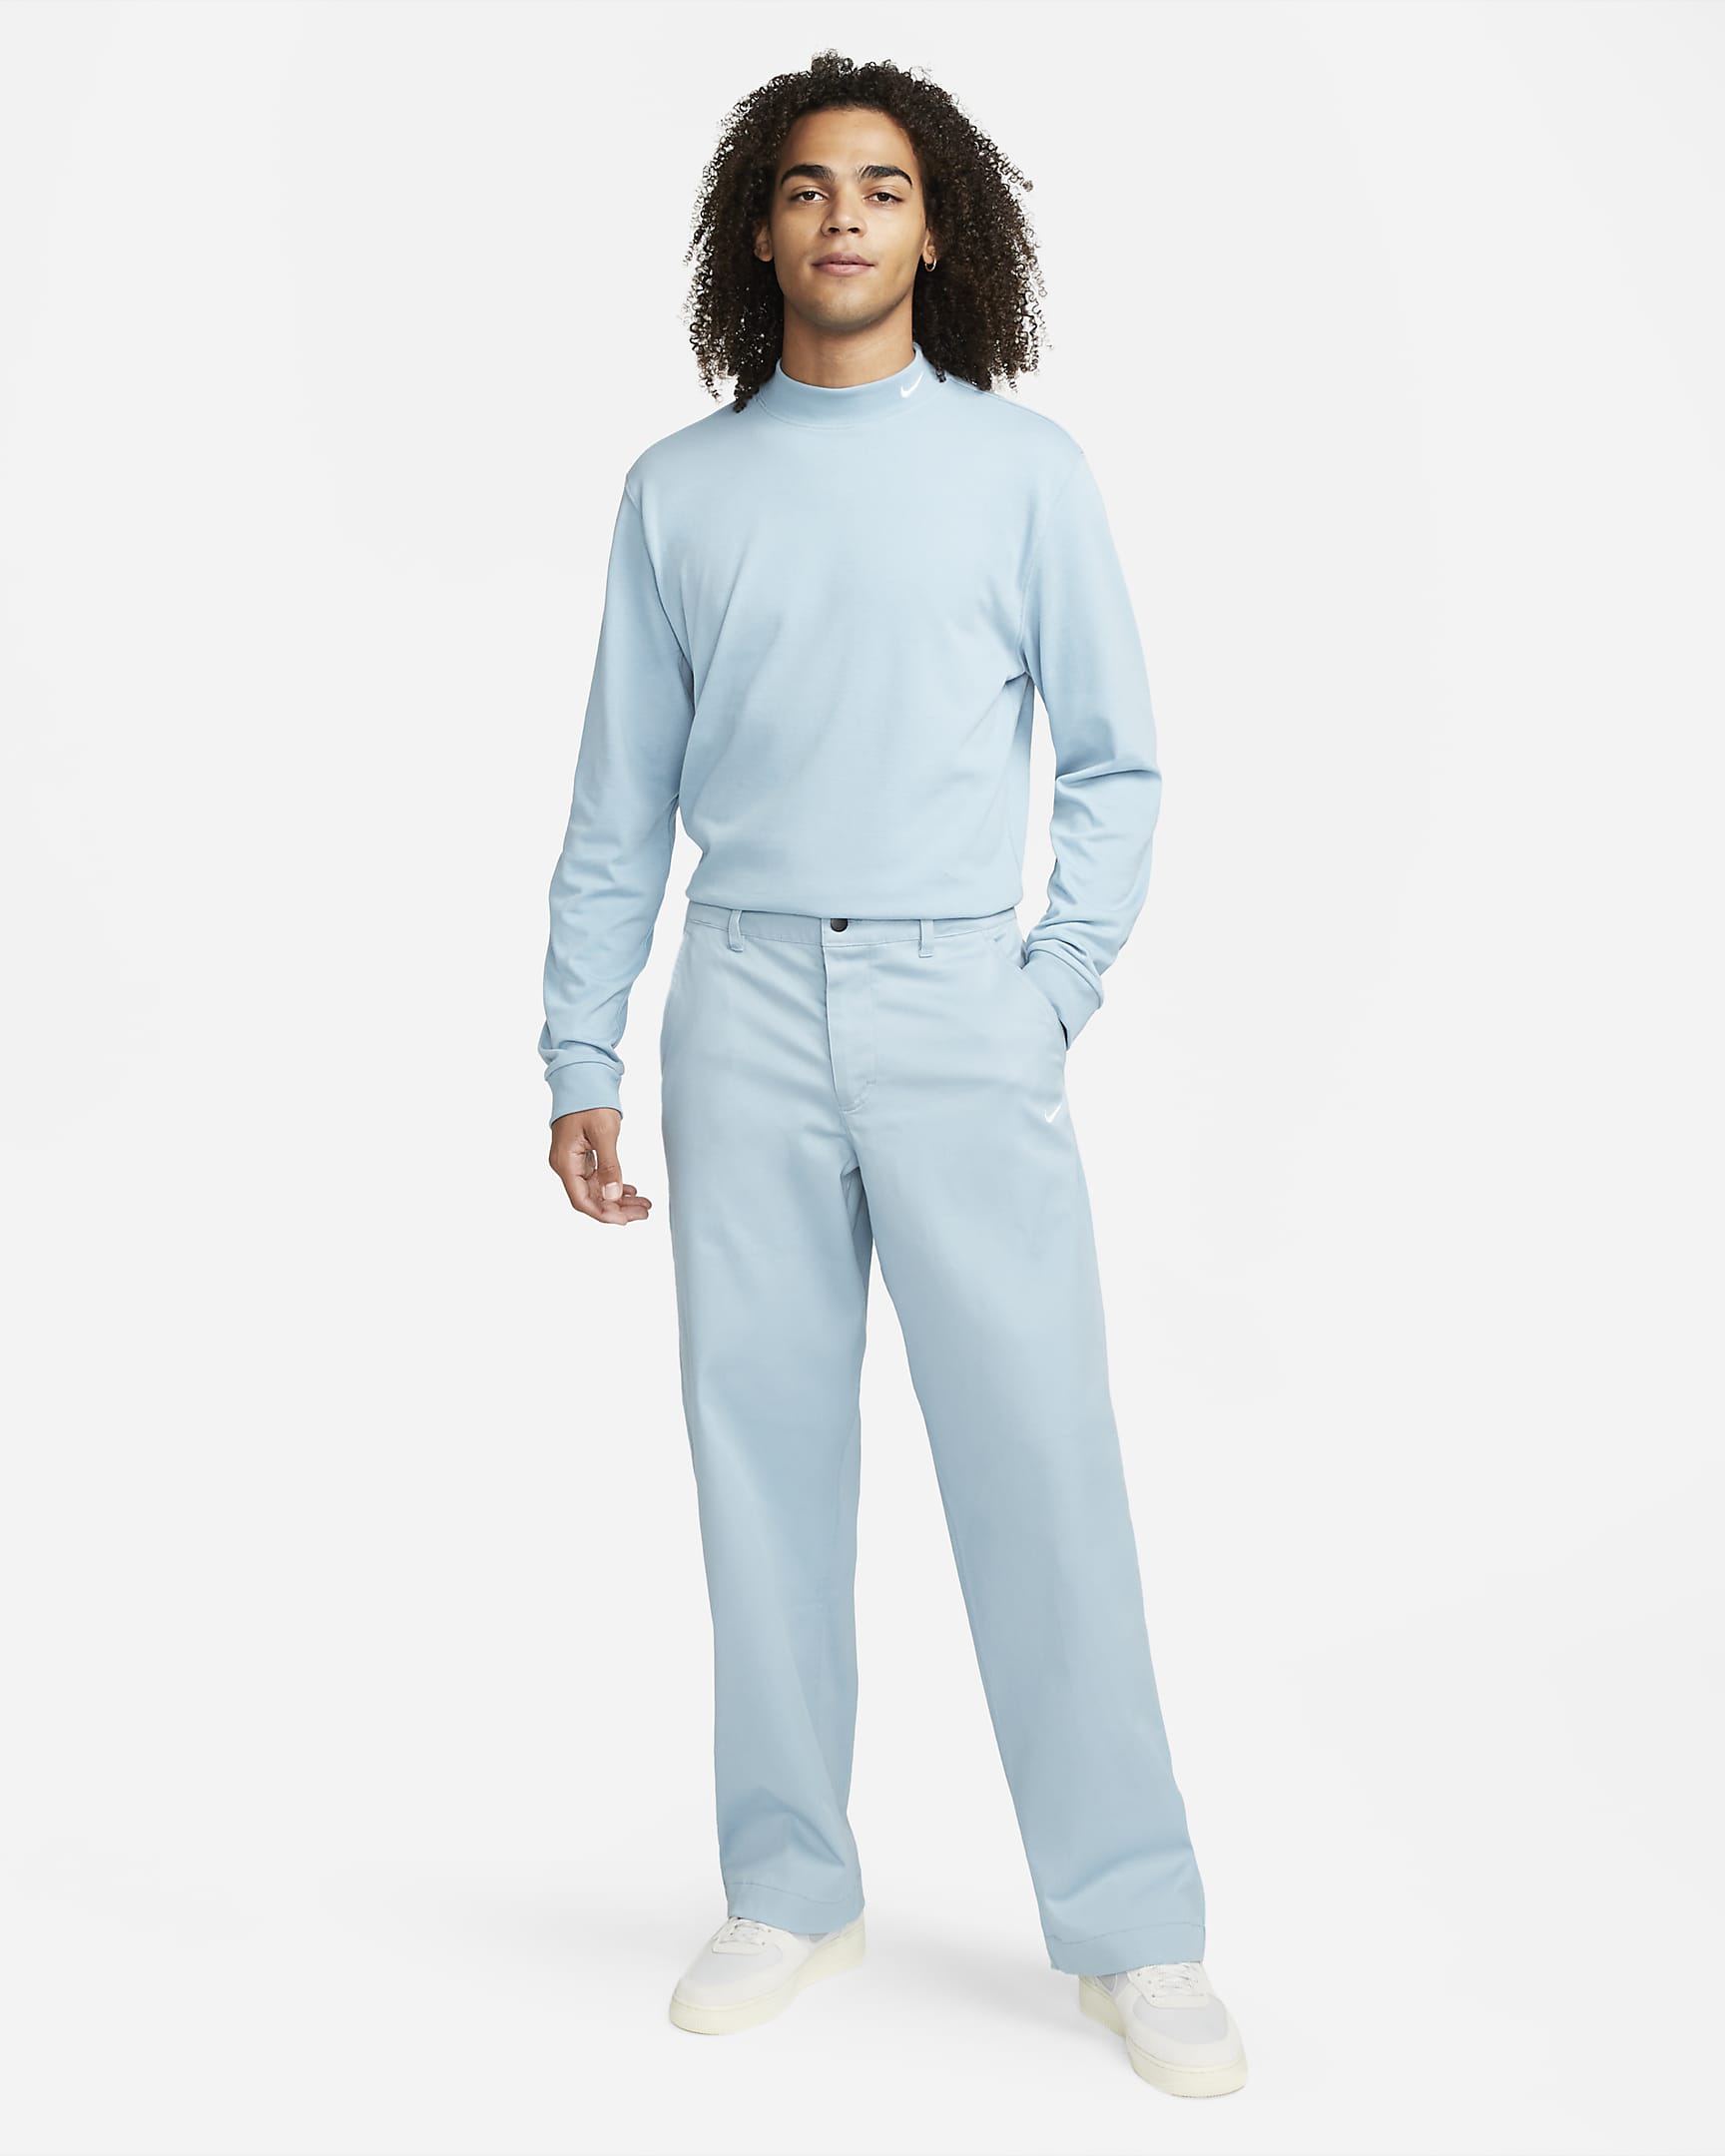 Nike Life Men's Unlined Cotton Chino Trousers. Nike CA